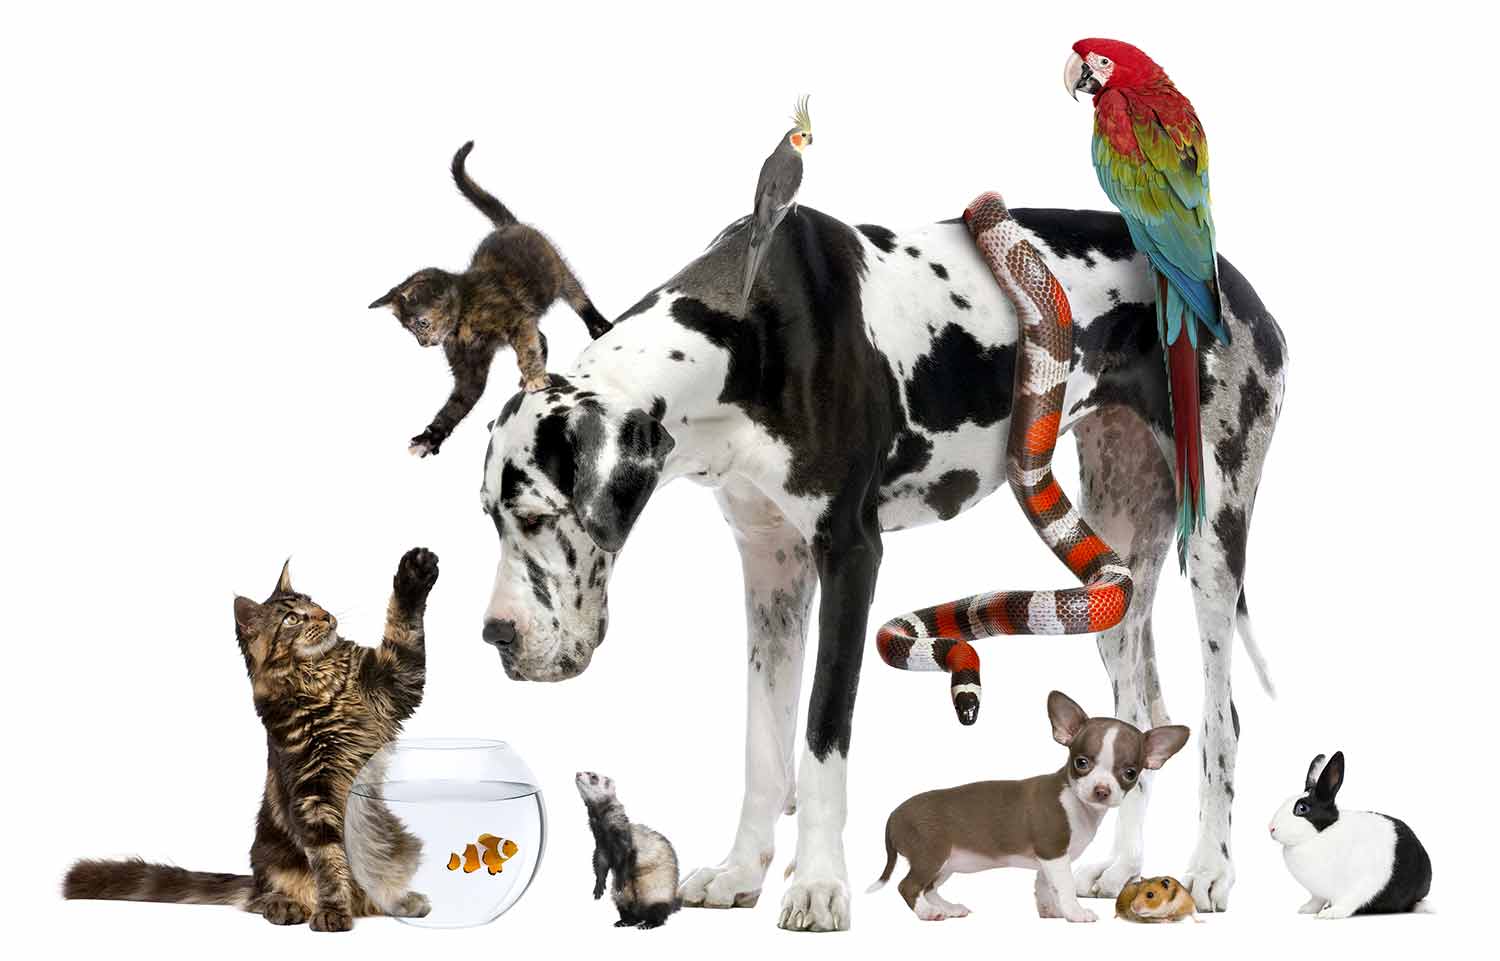 A kitten, two birds, and a snake rest on a large dog that is looking at a cat while a goldfish bowl, rabbit, guinea pig, ferret, and puppy sit on the floor